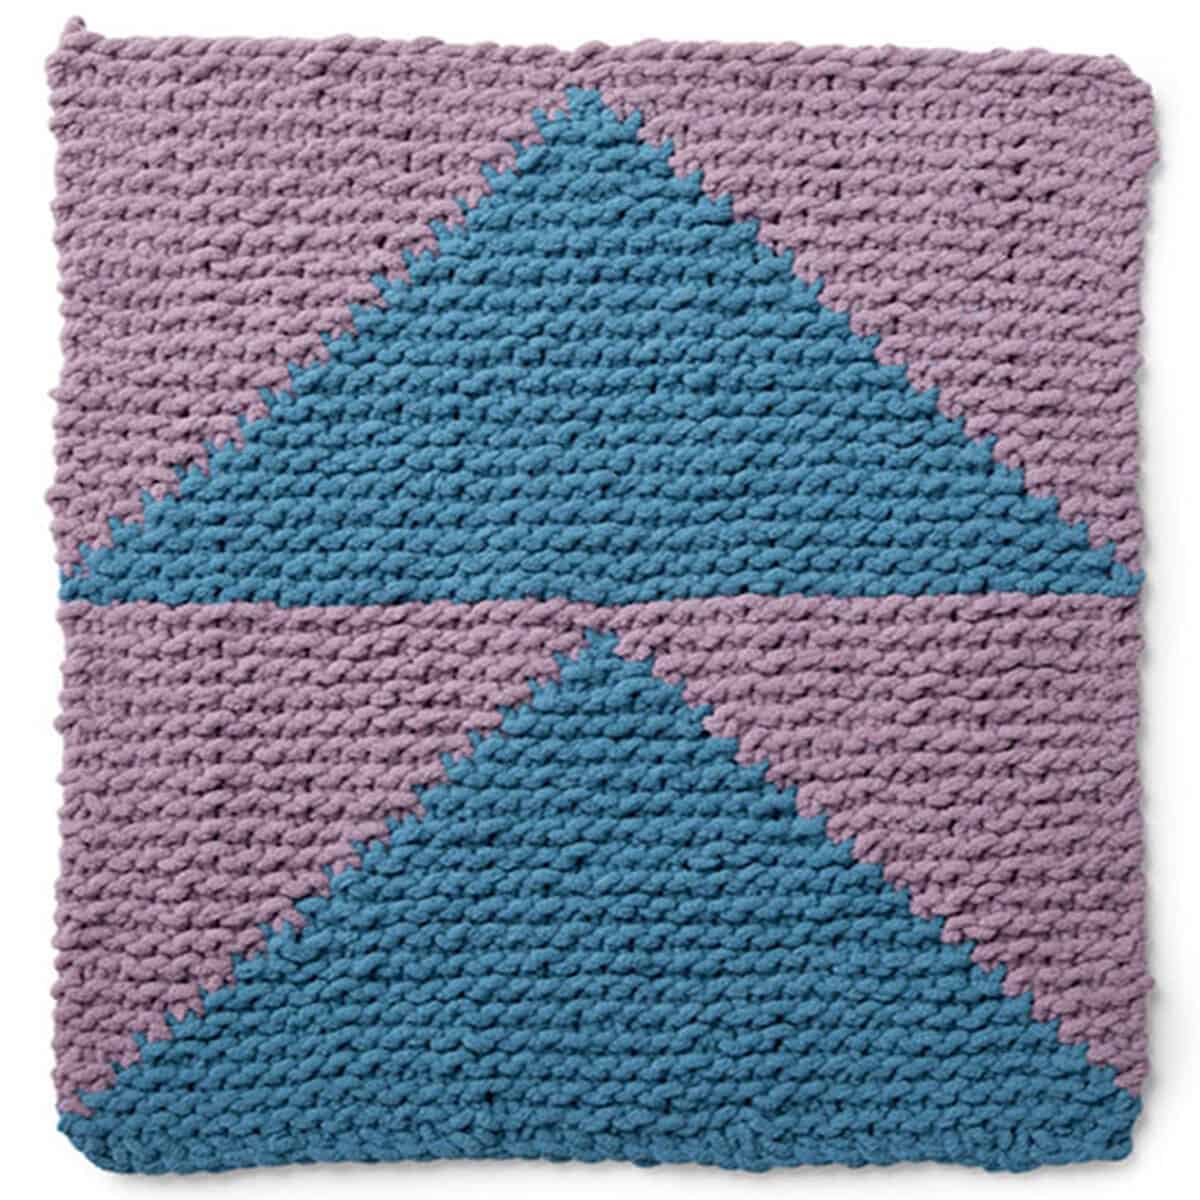 Knitted Square in the Flying Geese Design with shades of blue and purple yarn colors.